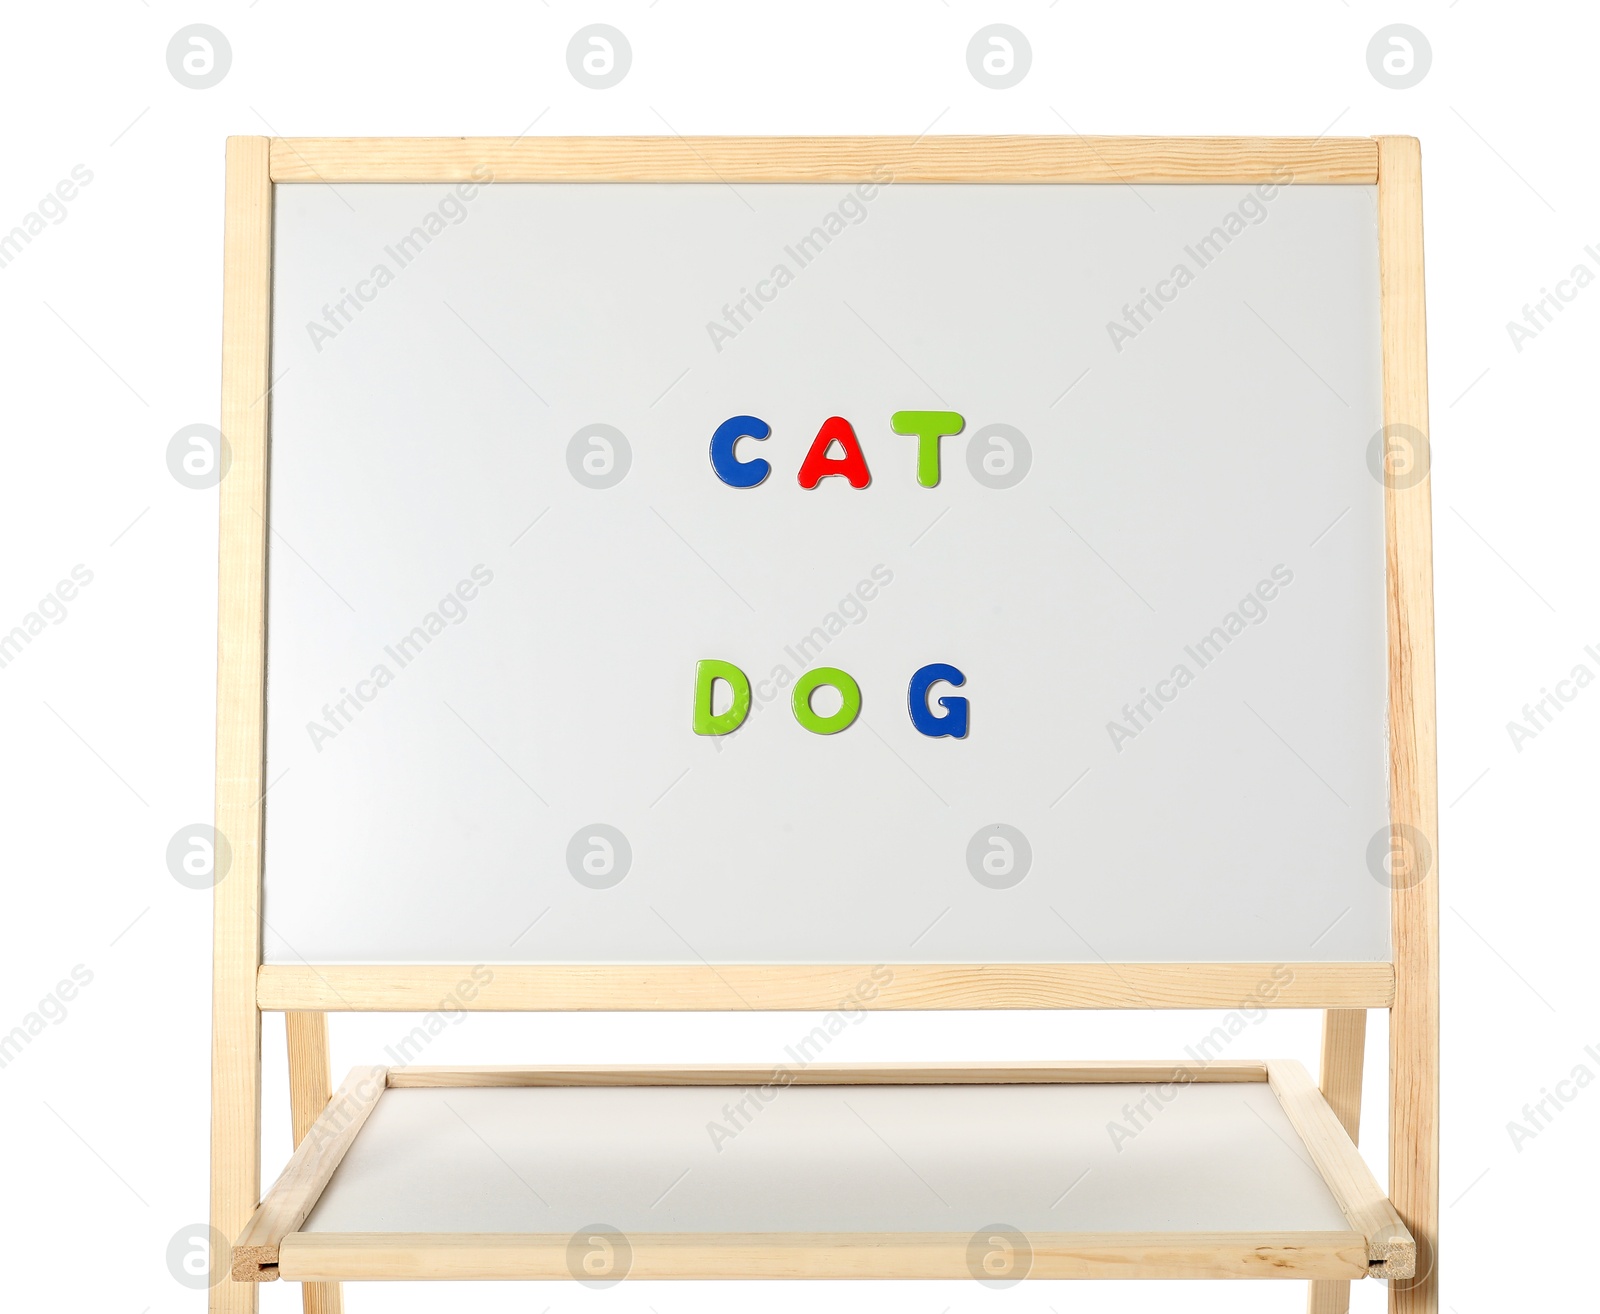 Photo of Words Cat and Dog made of magnetic letters on board against white background. Learning alphabet